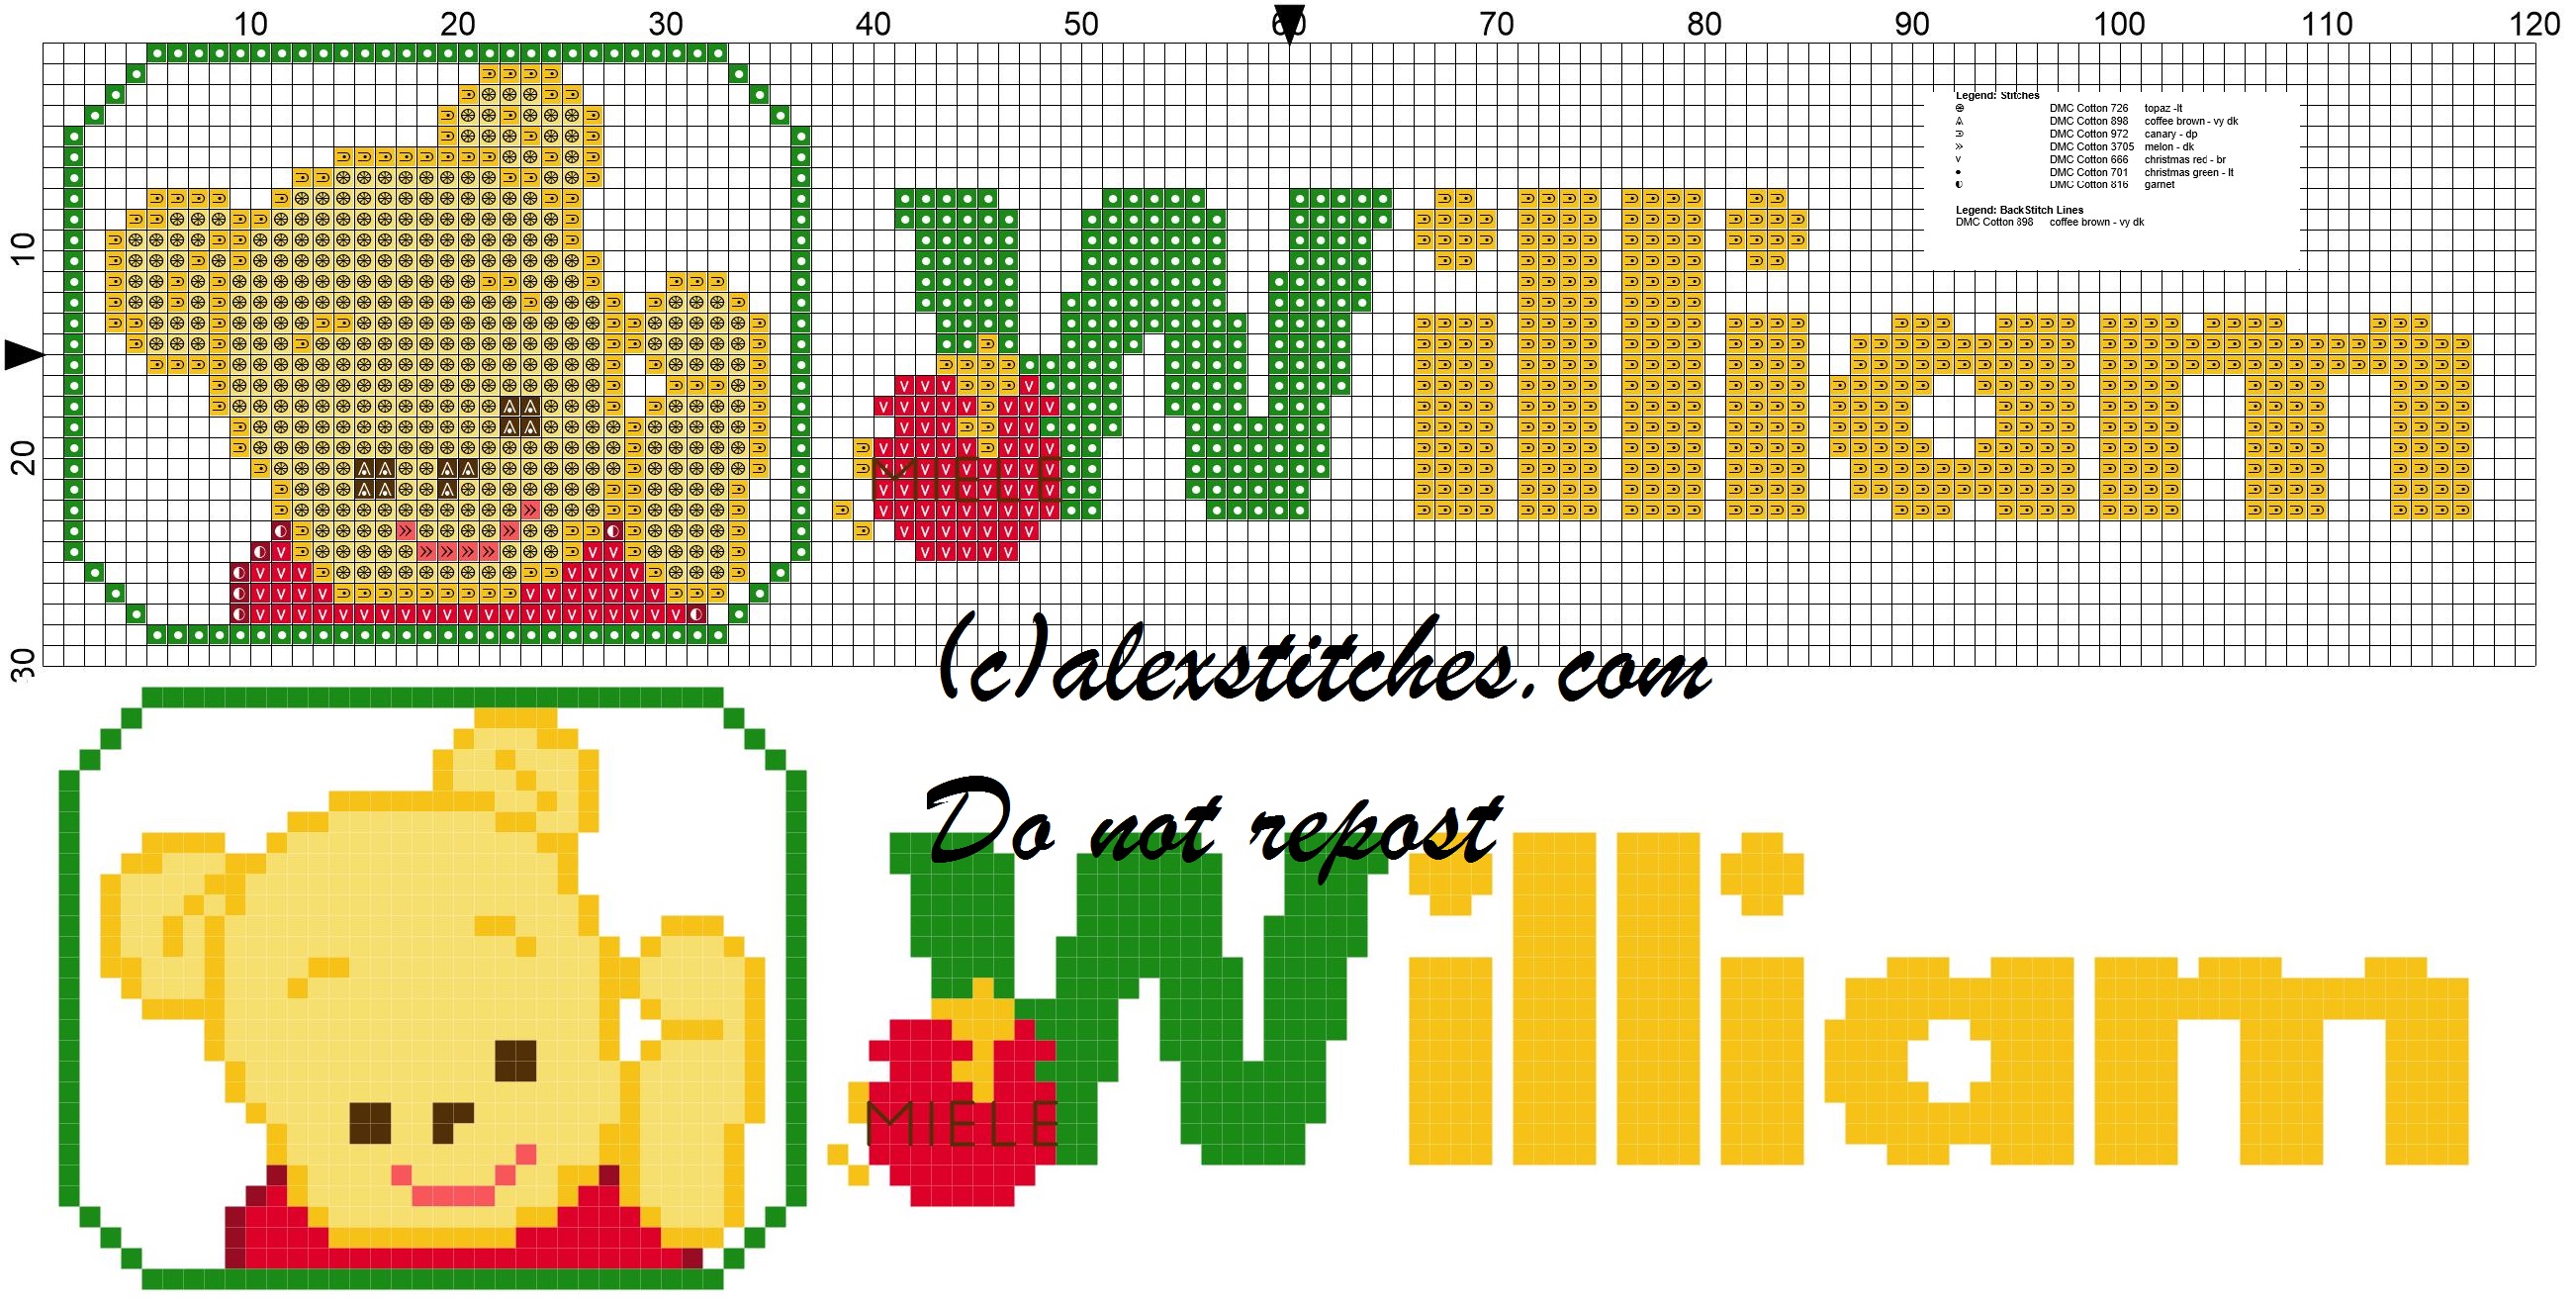 William name with Baby winnie the pooh free cross stitches pattern